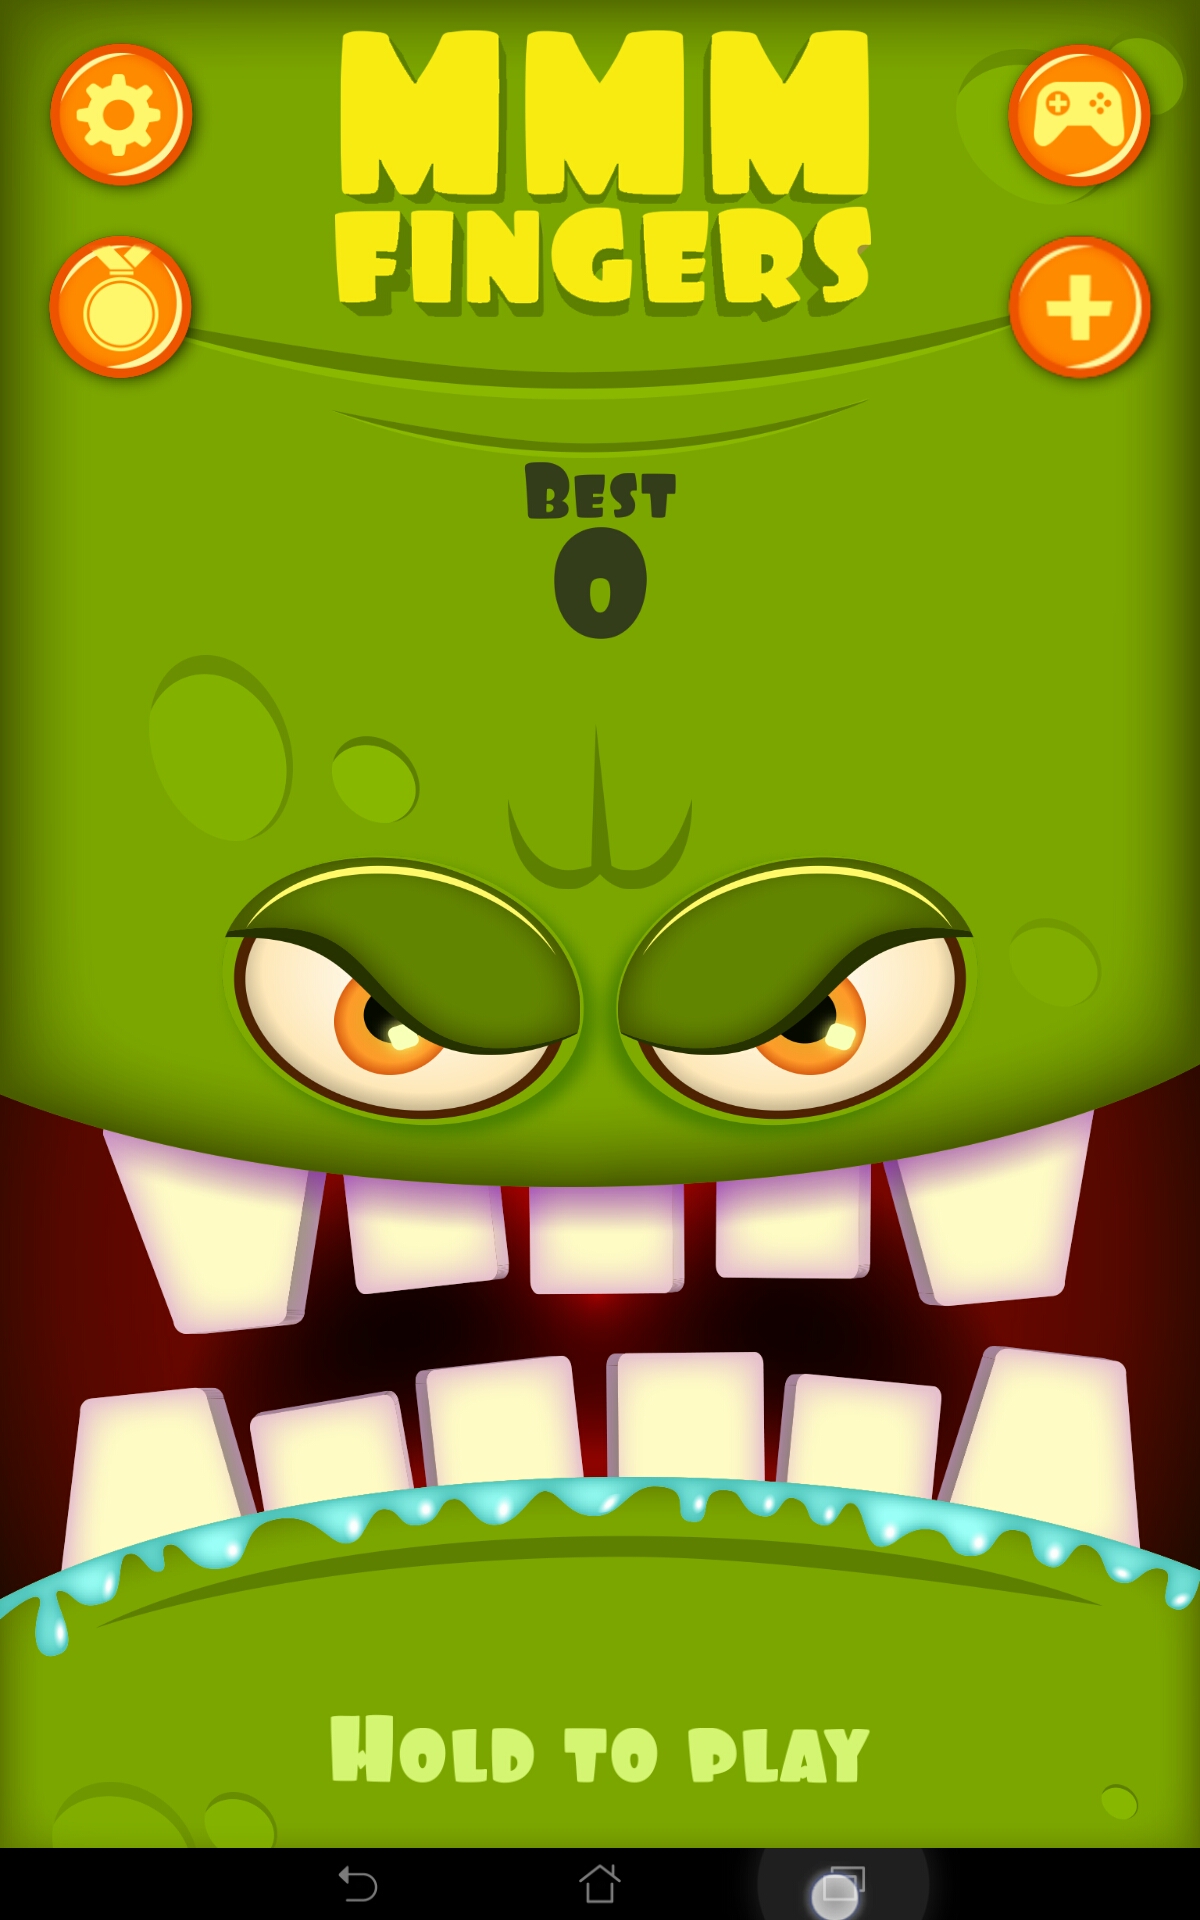 Game start screen which shows the same face as the end screen with a "hold to play" text at the bottom, which places players in the correct situation to start playing.